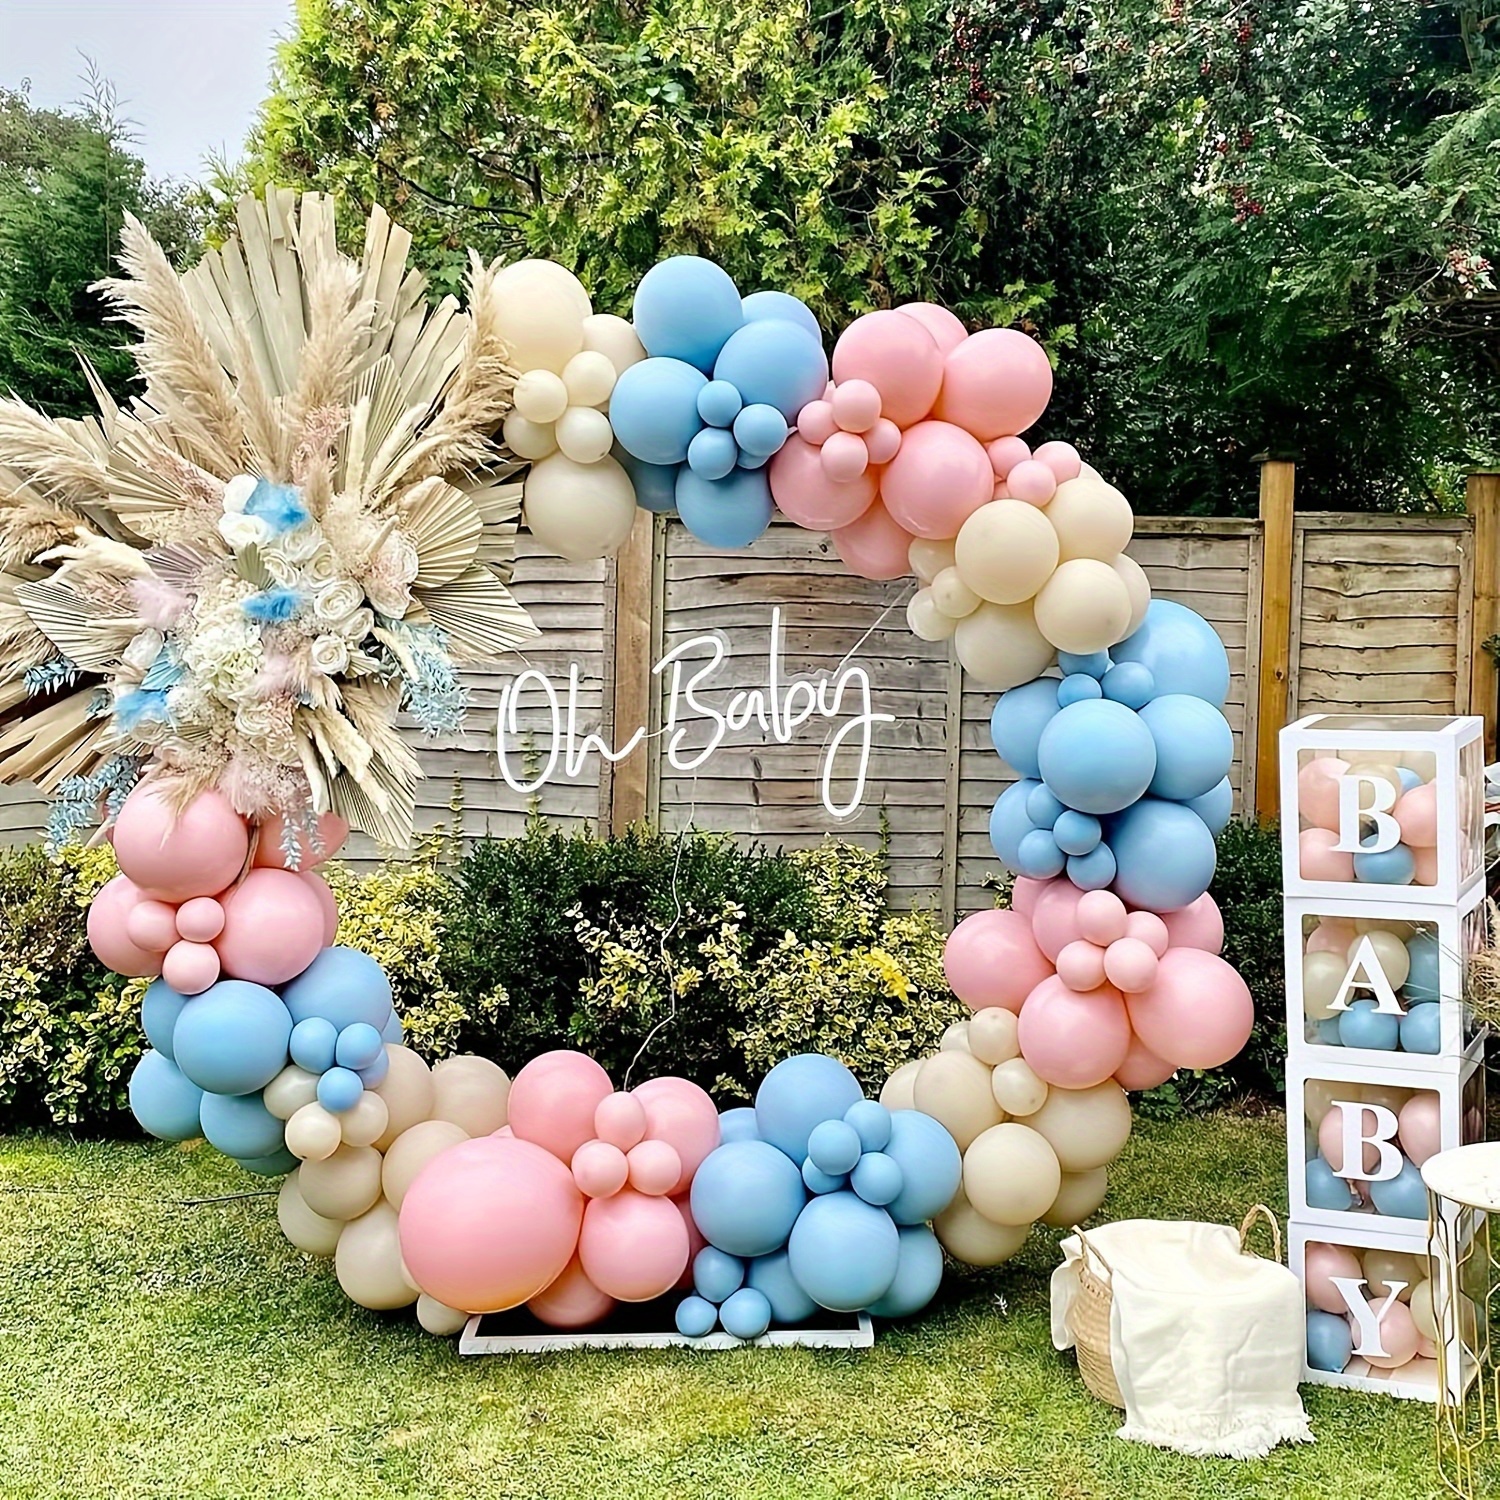 Gender Reveal Party Decoration Boy or Girl Party Supplies with Baby Boxes  36 Inch Gender Reveal Balloon Pink and Blue Gender Reveal Balloons Garland